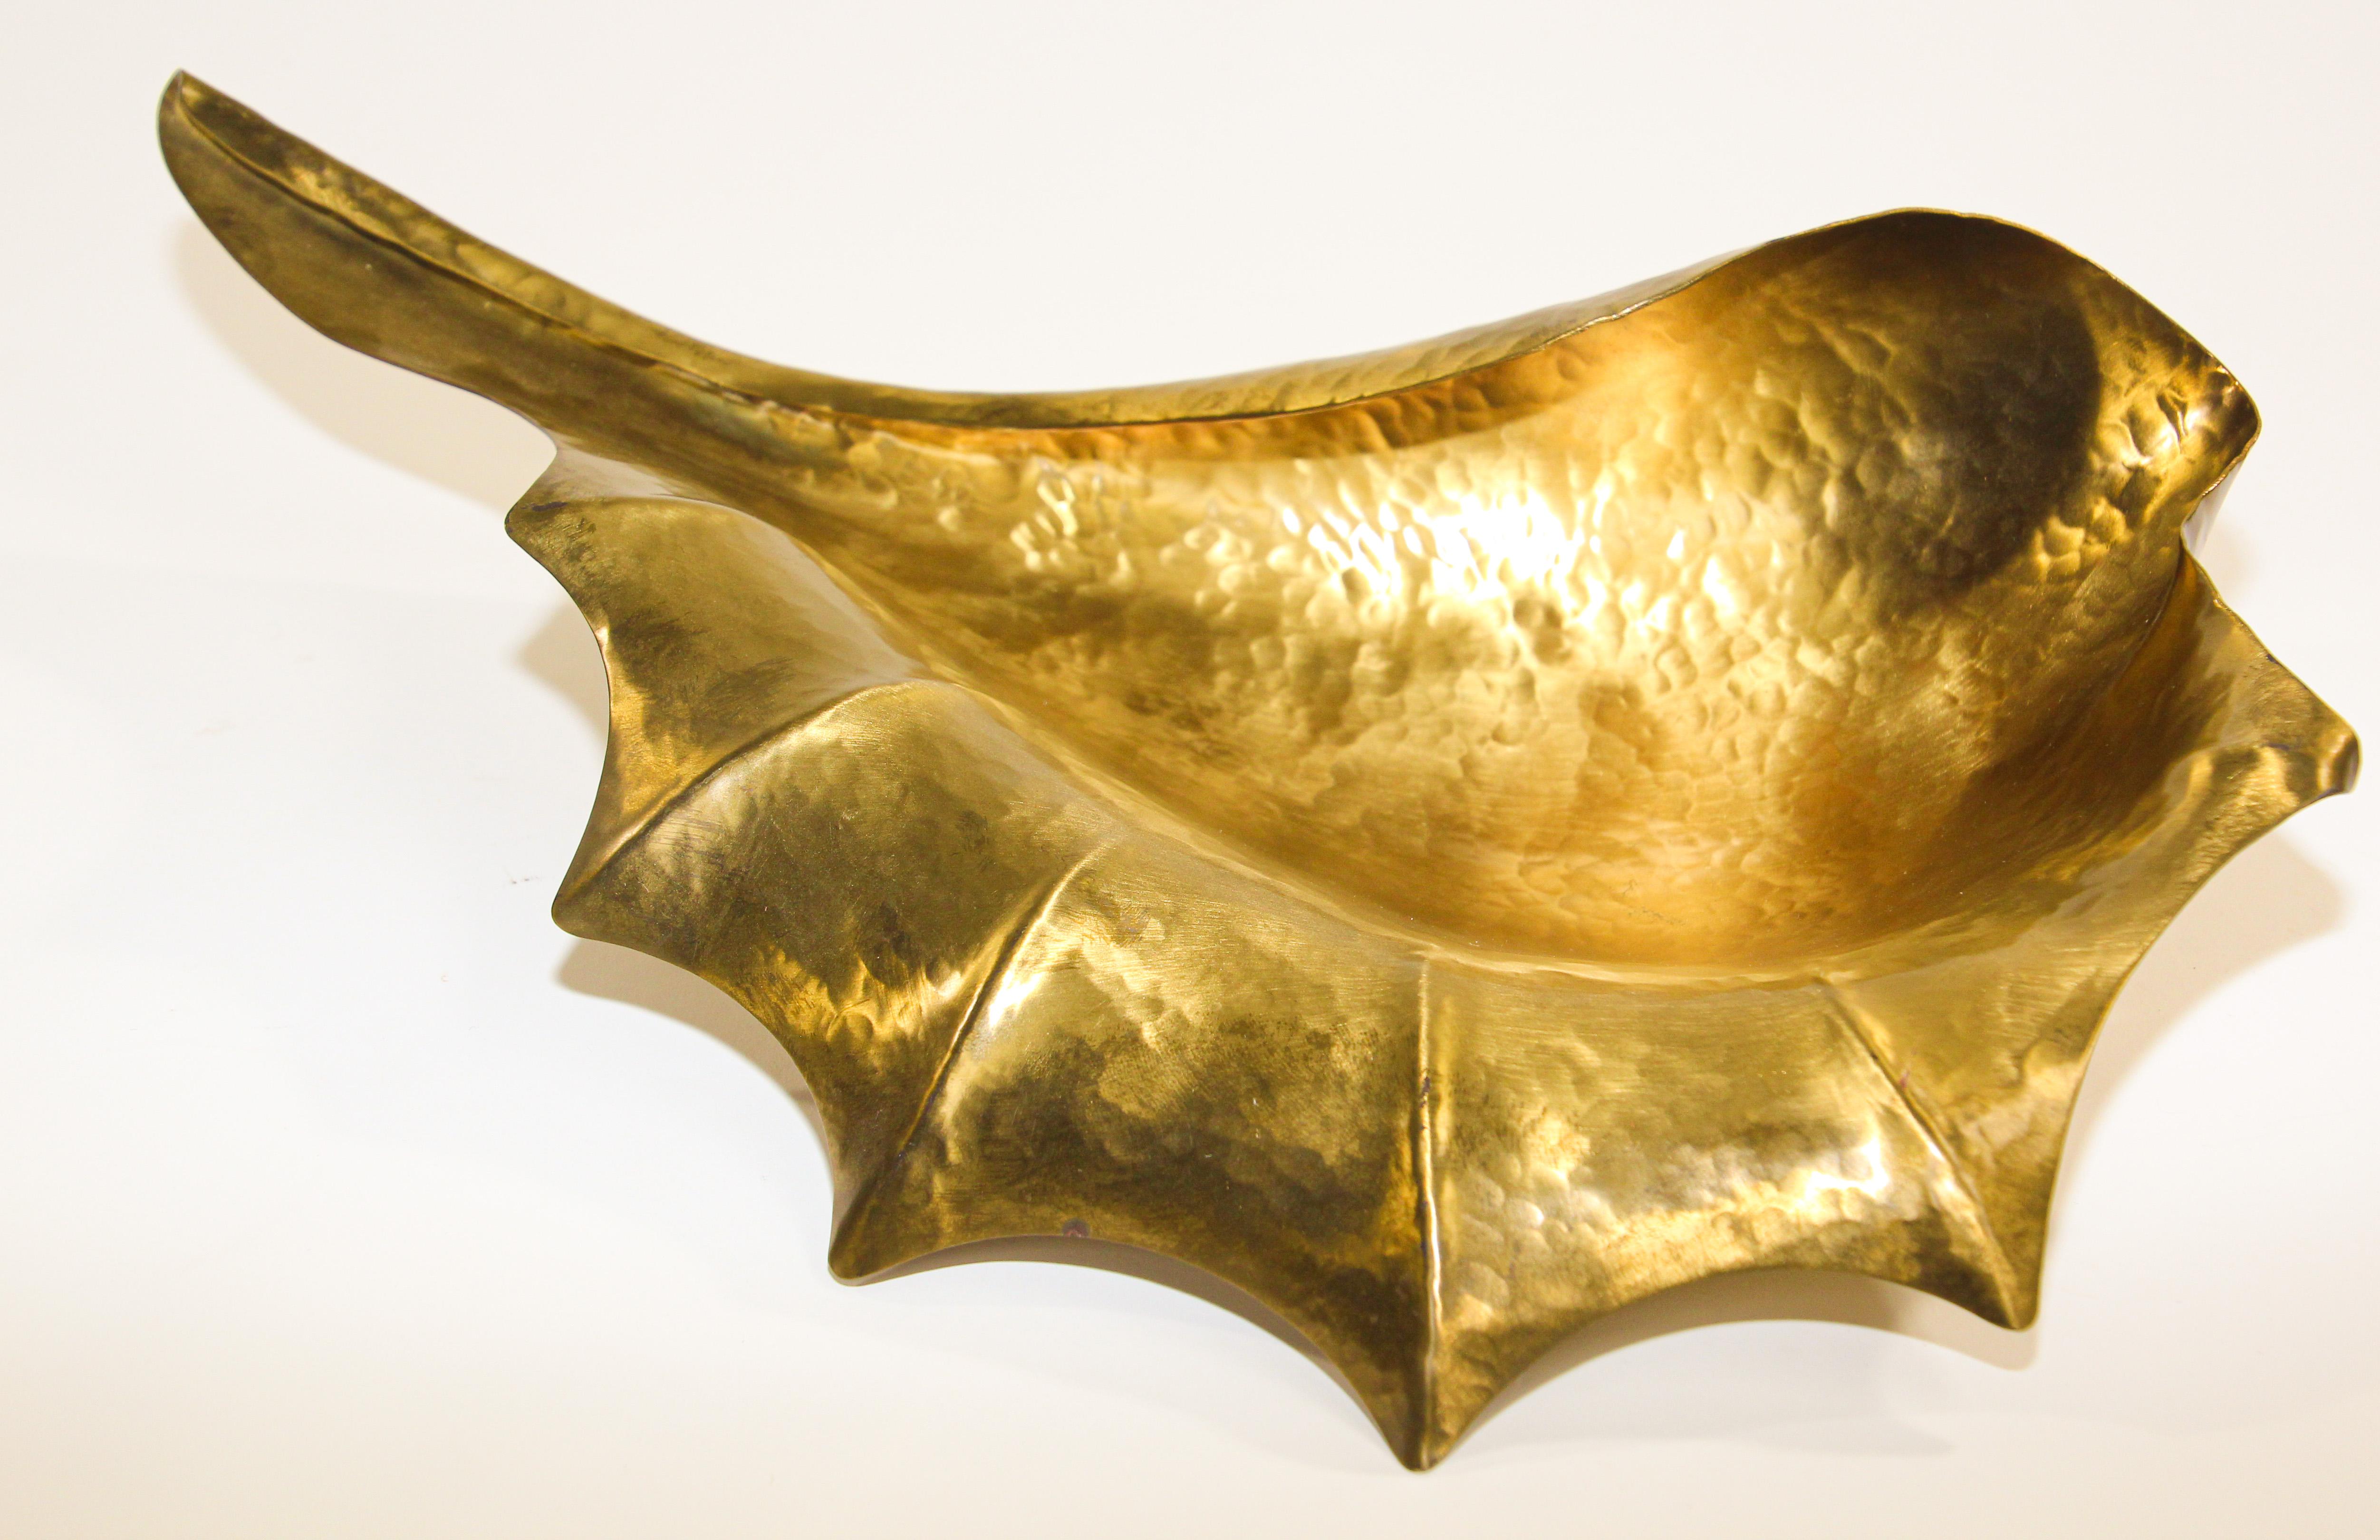 Vintage Italian decorative mid-century bowl in the shape of a large leaf or shell.
Beautiful as a standalone center piece, vide poche, for jewelry, or small items on a desk, vanity, nightstand table, walk-in-closet.
Piece is marked on bottom